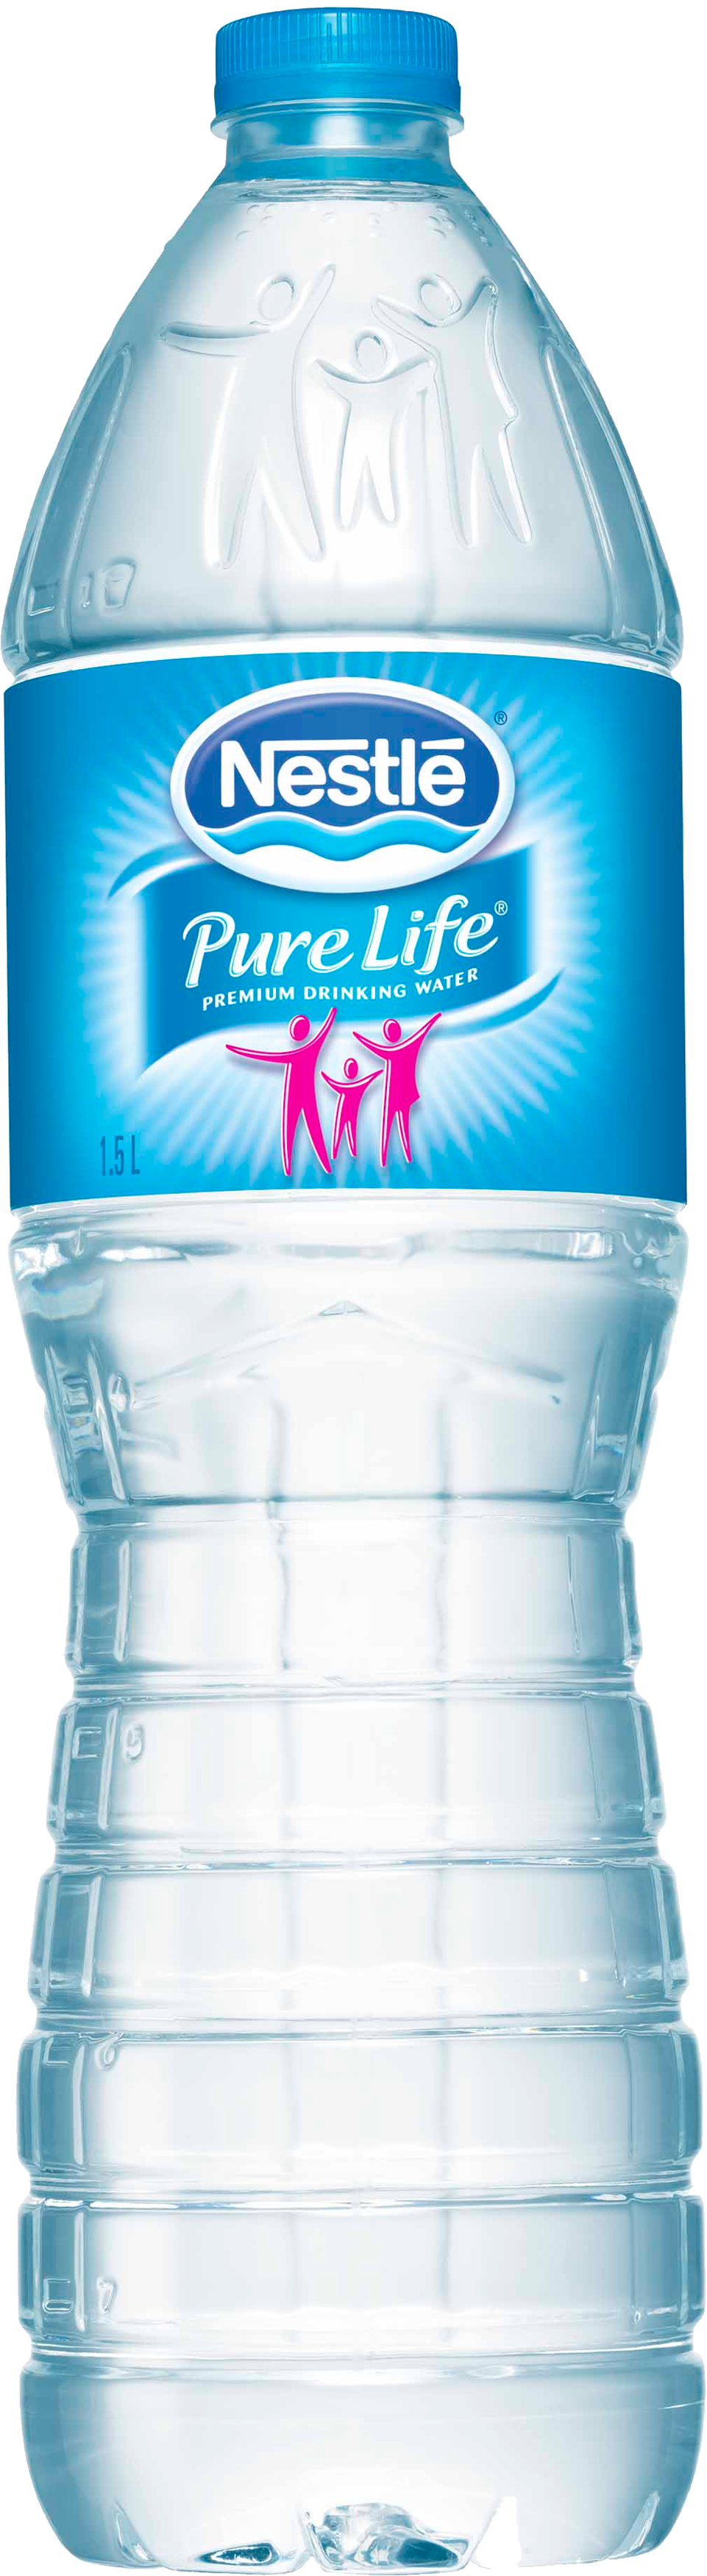 Images free download image. Water bottle png